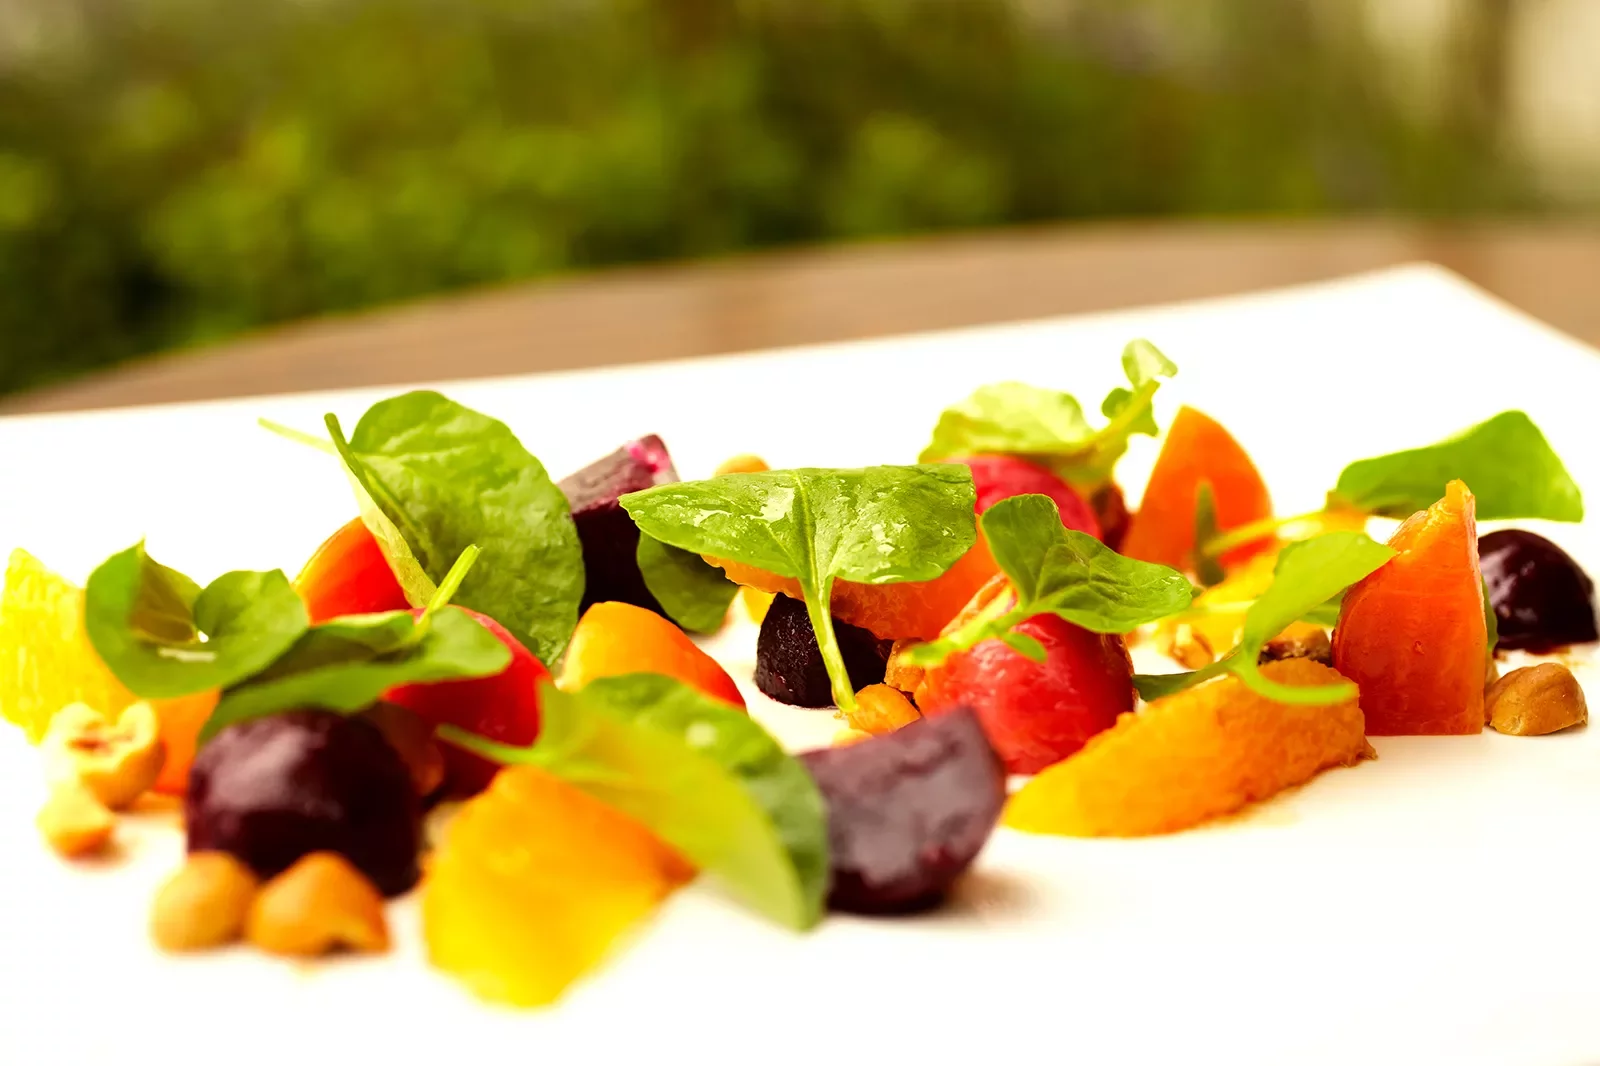 Small plate of food, beets, fruit, micro greens, etc.